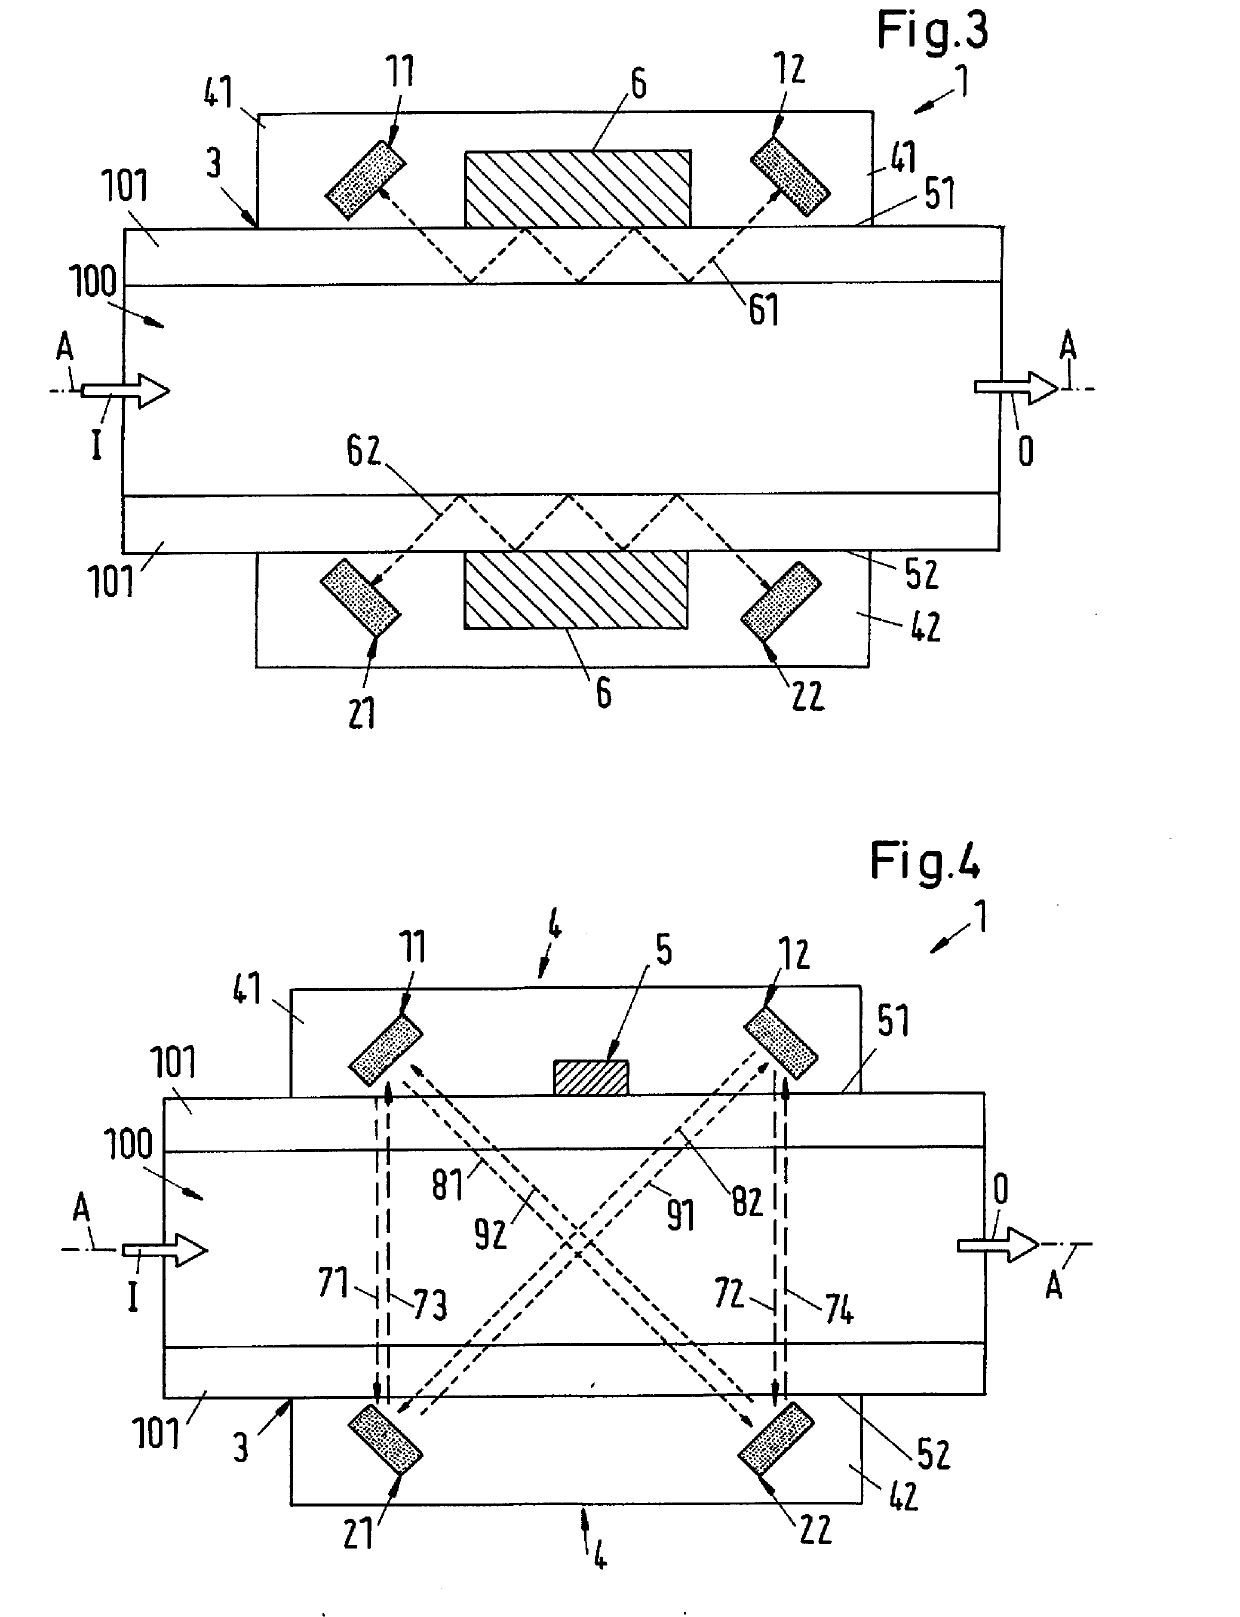 Ultrasonic measuring device and a method for the ultrasonic measurement on a flowing fluid